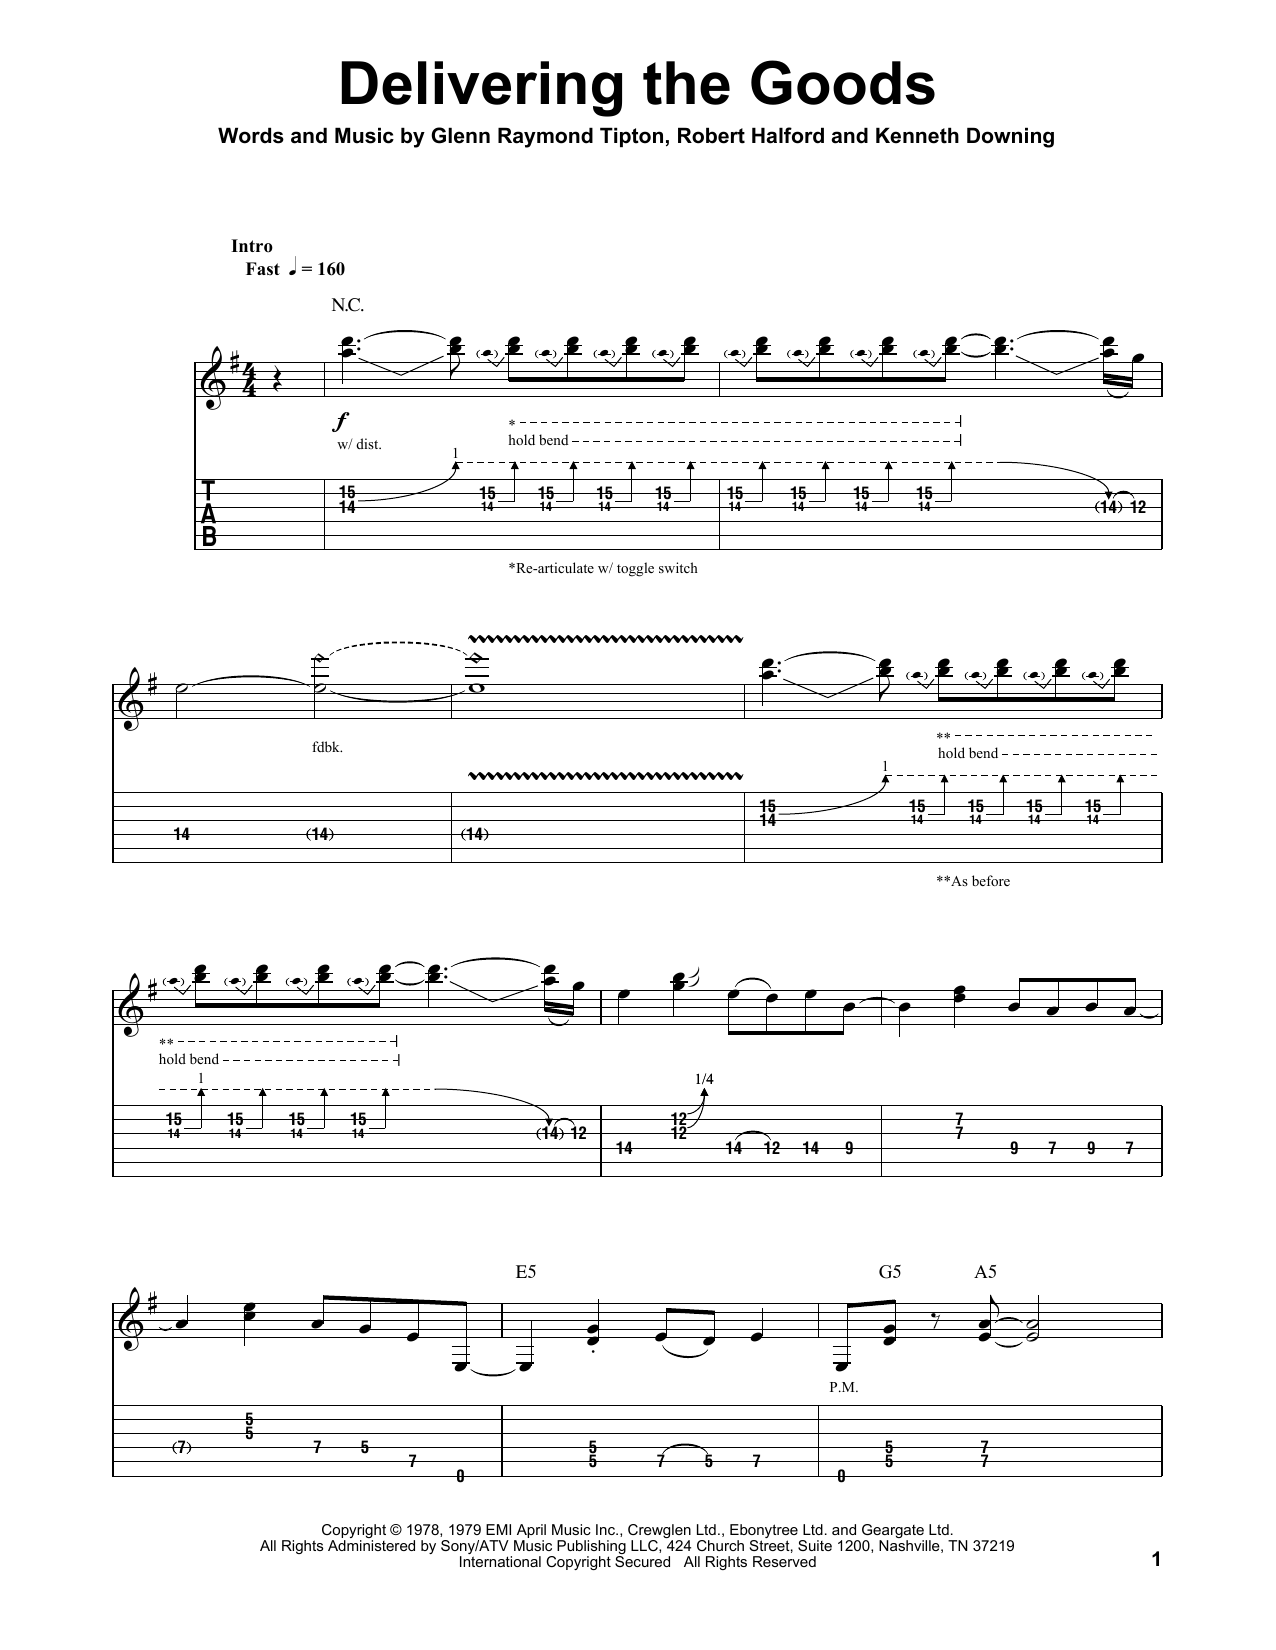 Download Judas Priest Delivering The Goods Sheet Music